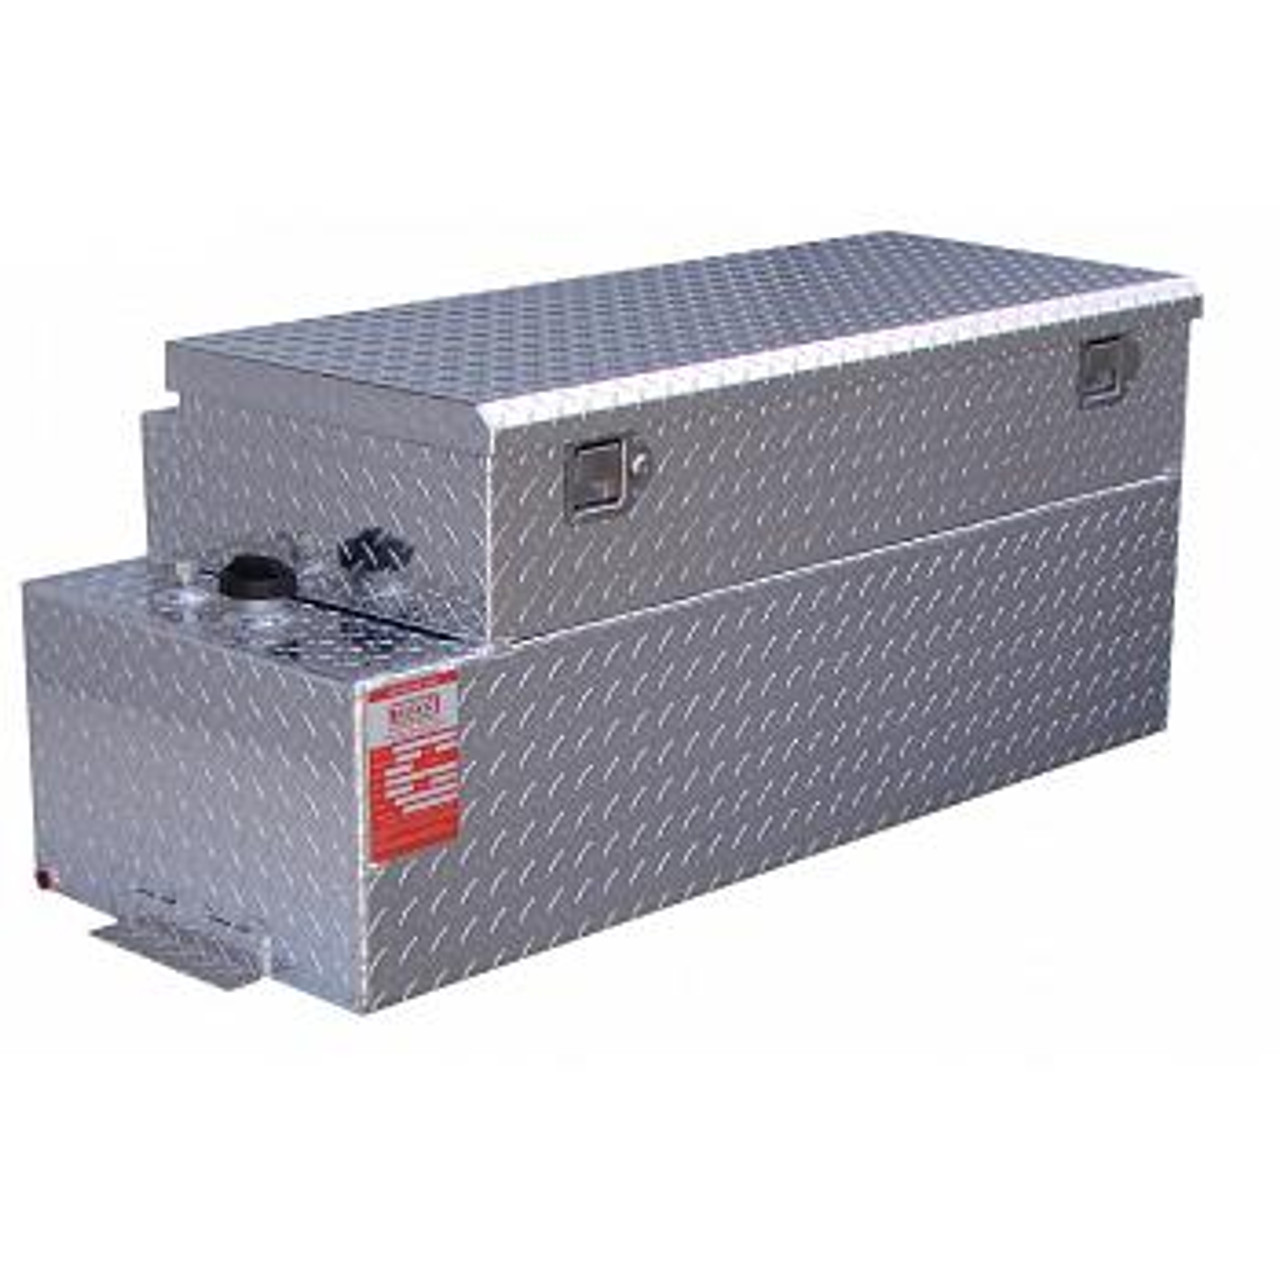 ATI FUEL TANKS AUX42FCBR9 Fuel Safe 42 gal auxiliary tank/toolbox combo  (cost includes install kit)